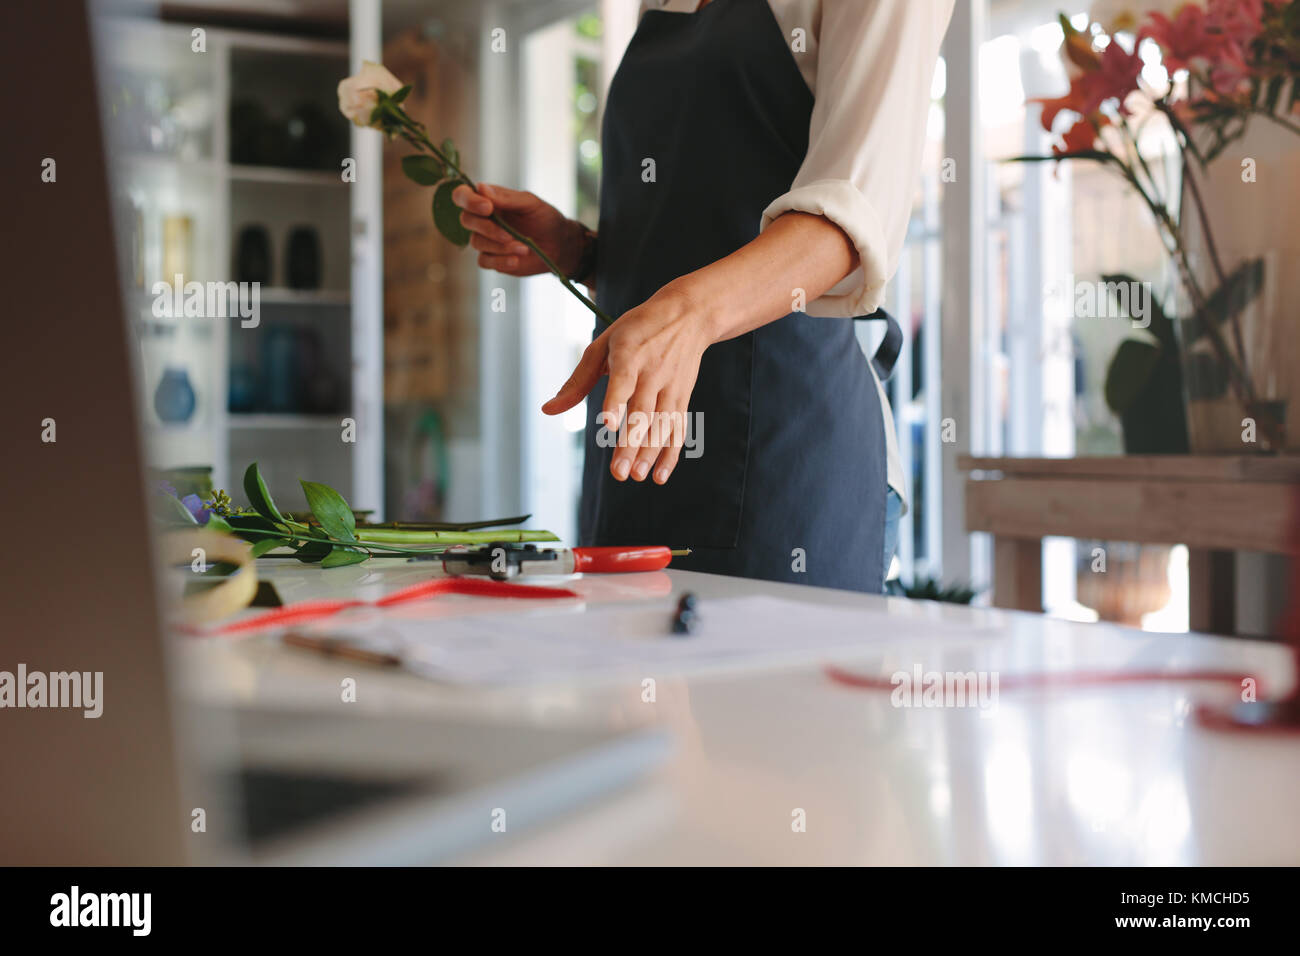 Hands of female working at flower shop arranging flowers. Woman florist making bouquet with flowers on counter. Stock Photo